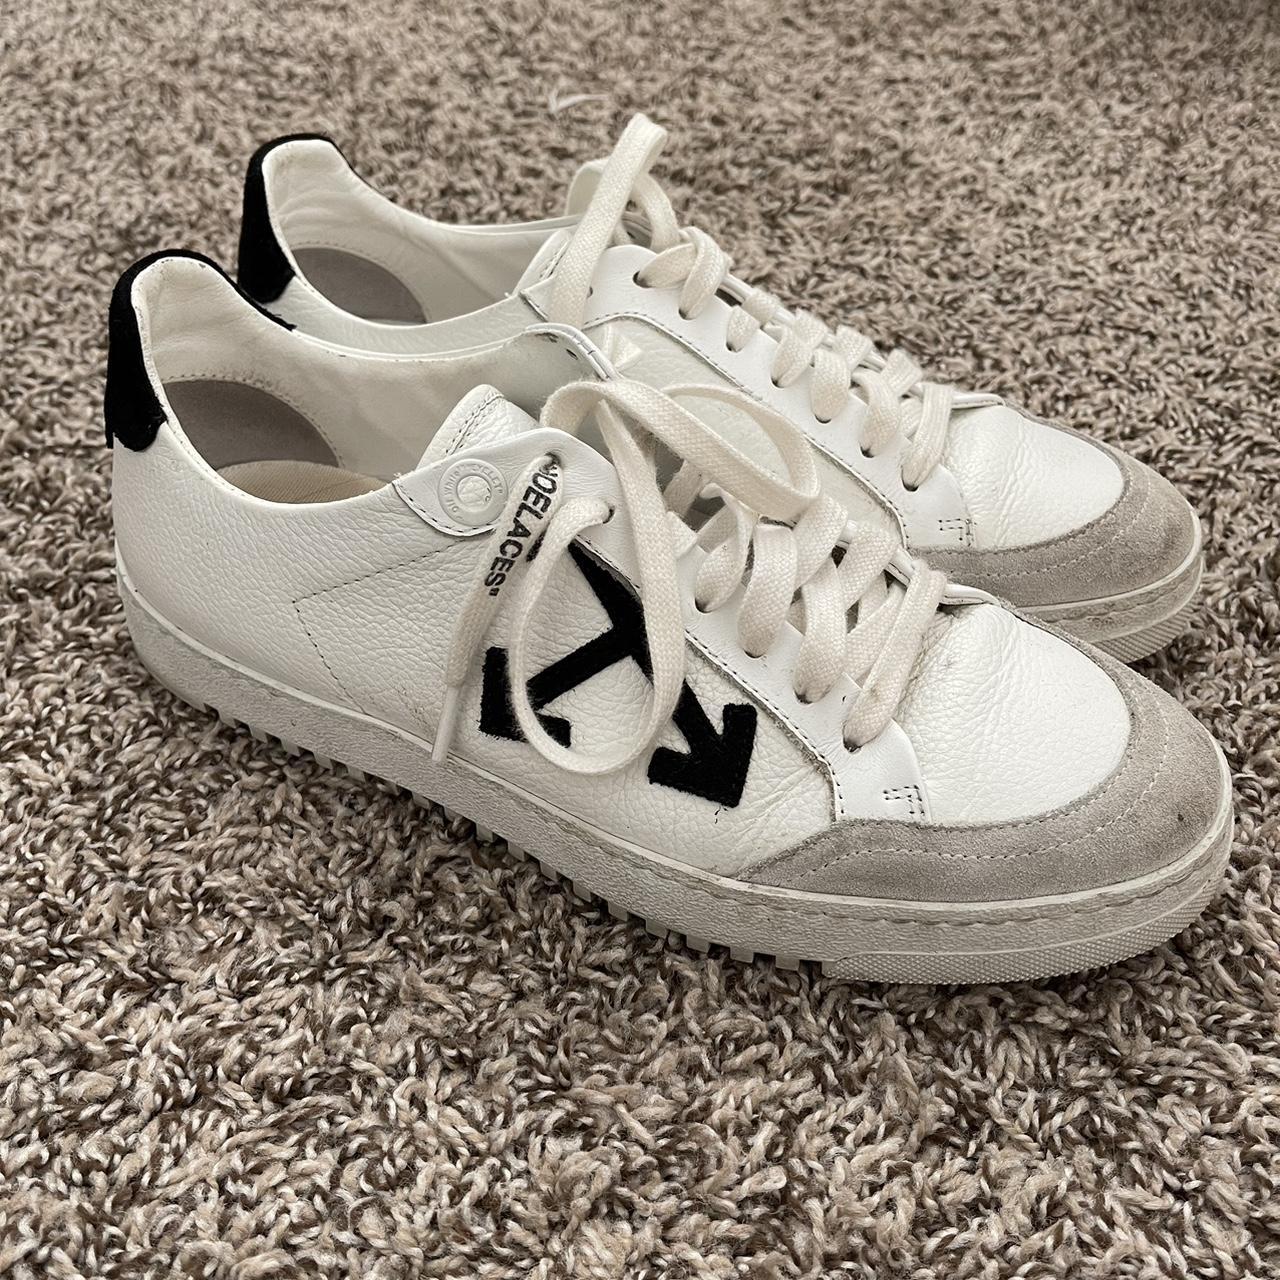 Acne Studios Ballow Tag sneakers for Men - White in UAE | Level Shoes